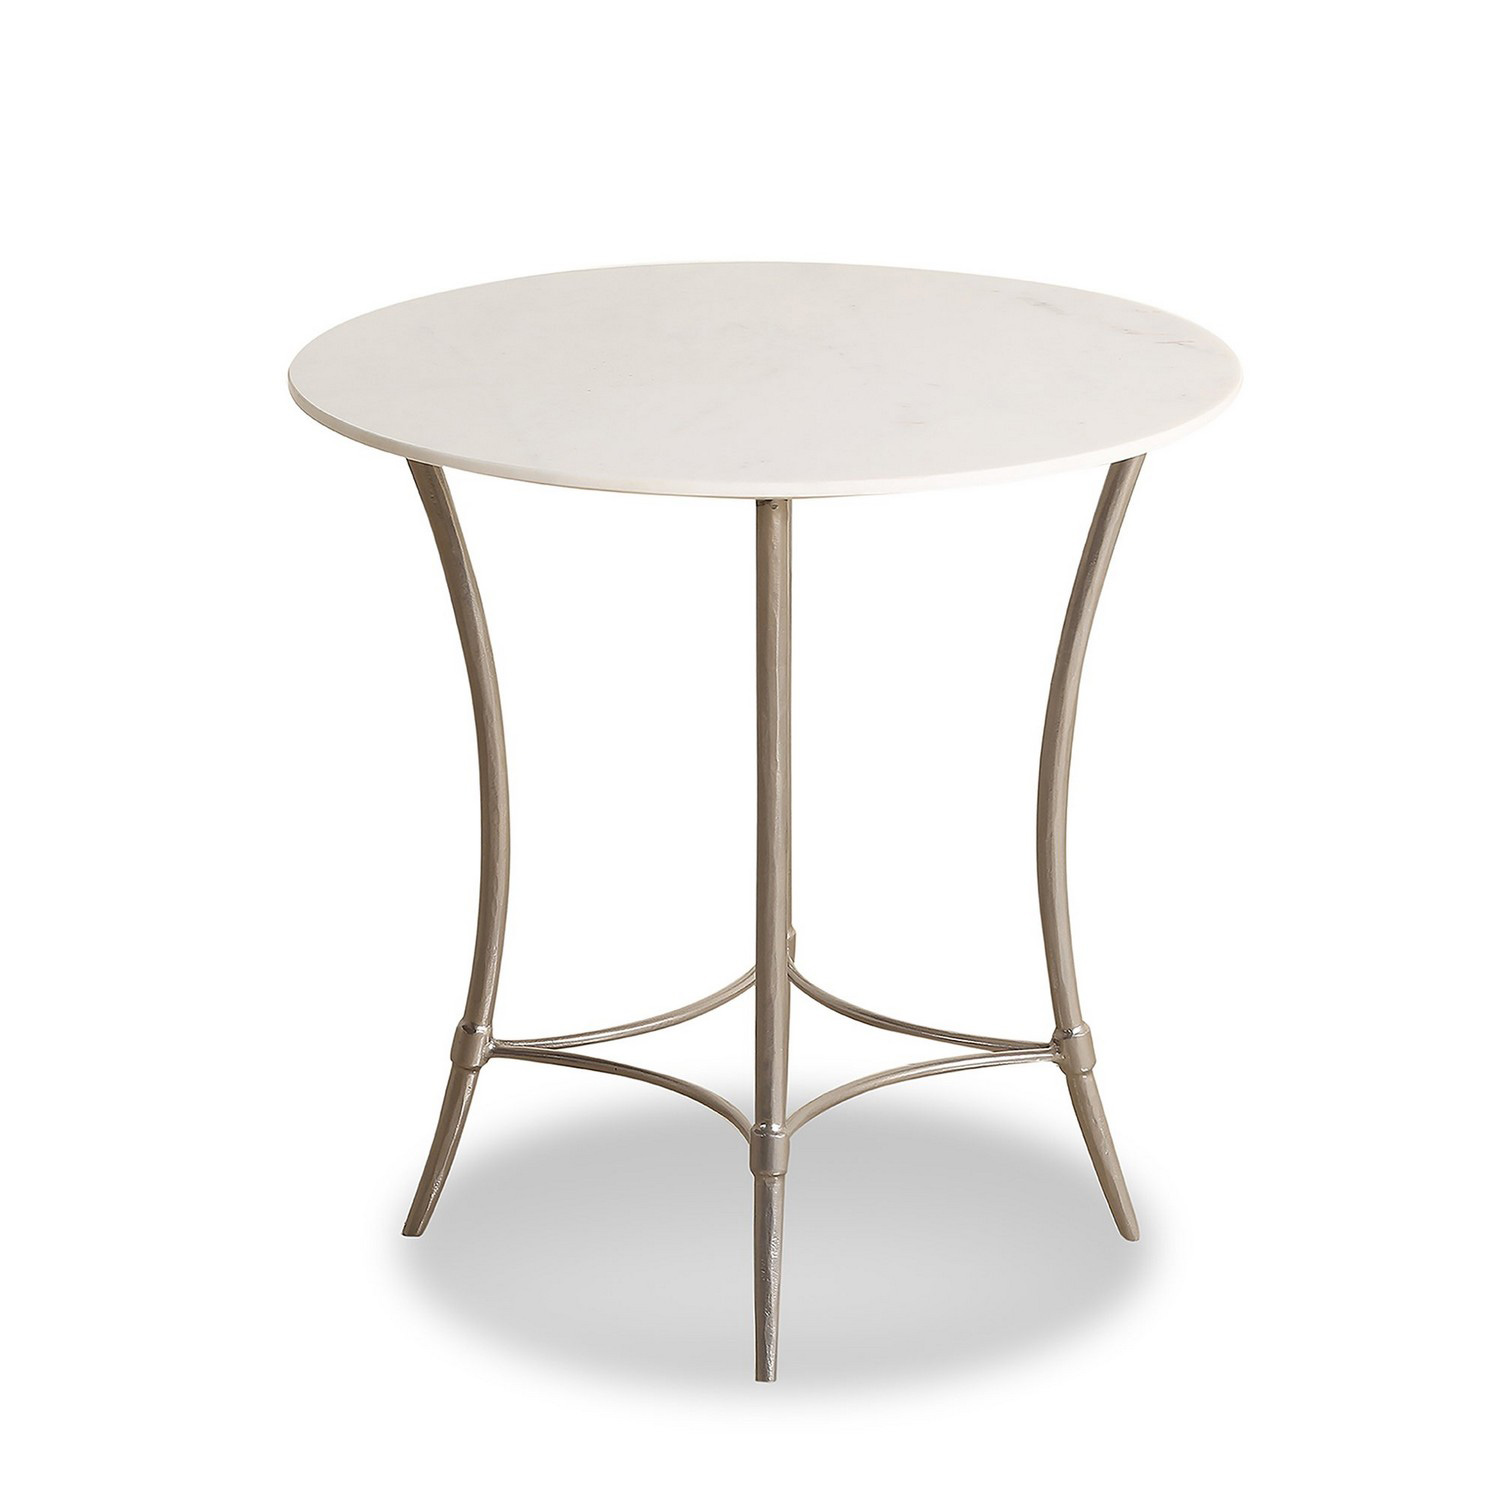 Parker House Crossings Palace Round End Table - Silver Clad